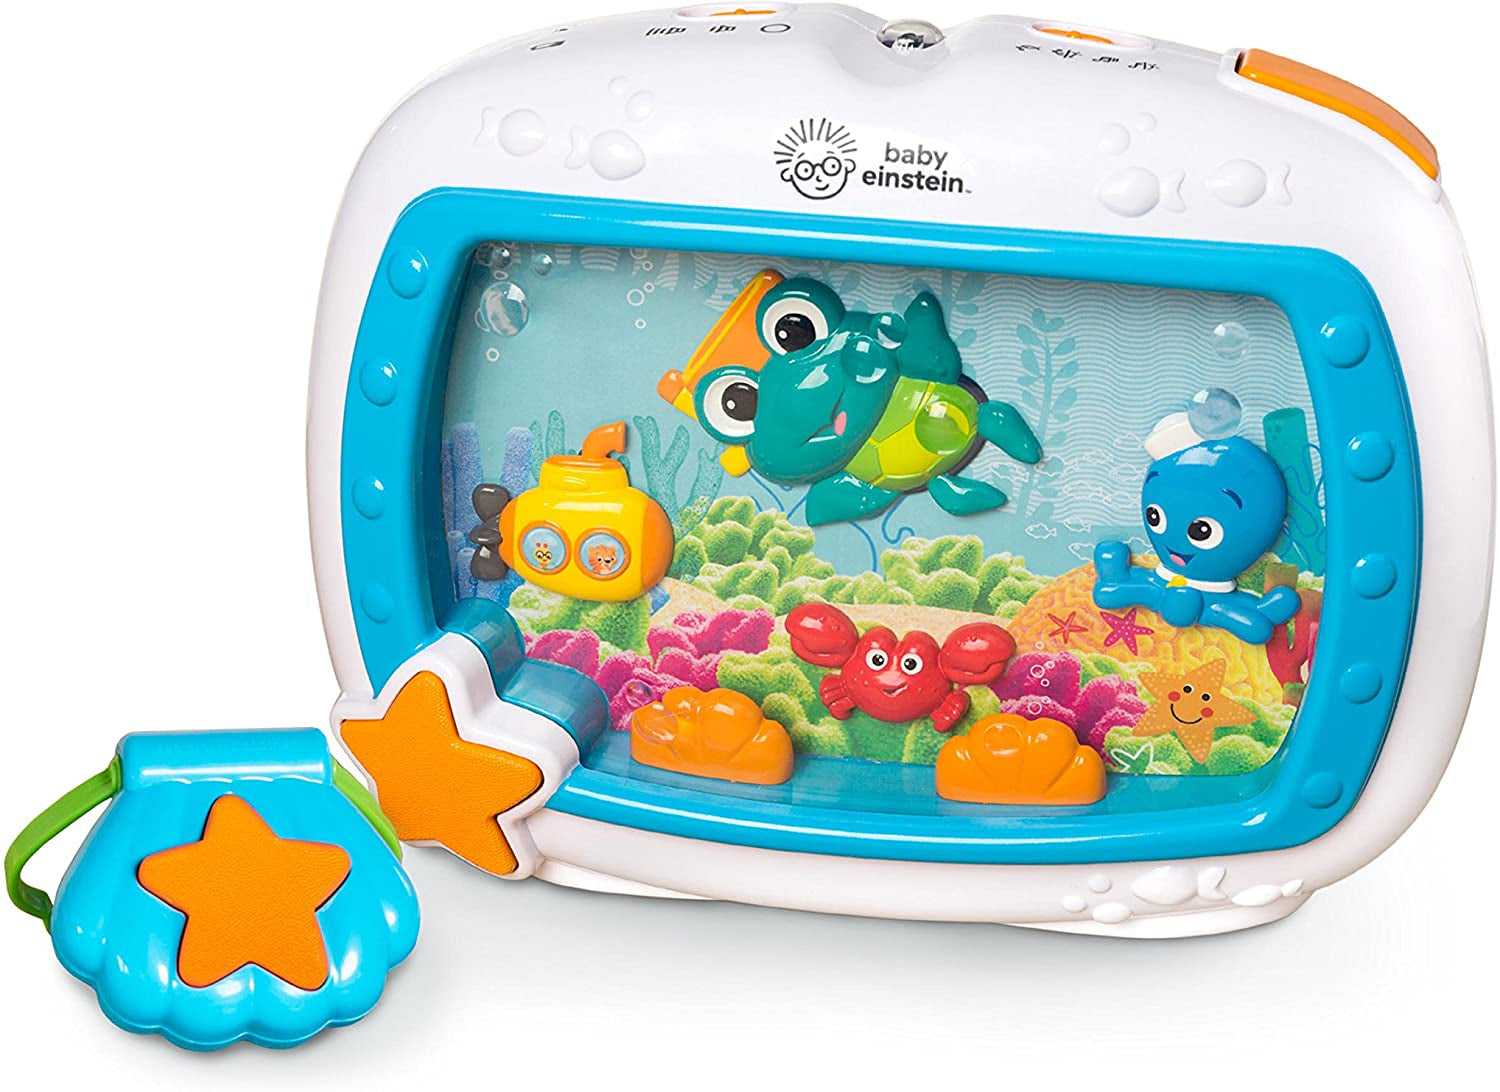 Baby Einstein, Sea Dreams Soother Cot Toy with Remote, Lights and Melodies, Newborns and up Multi